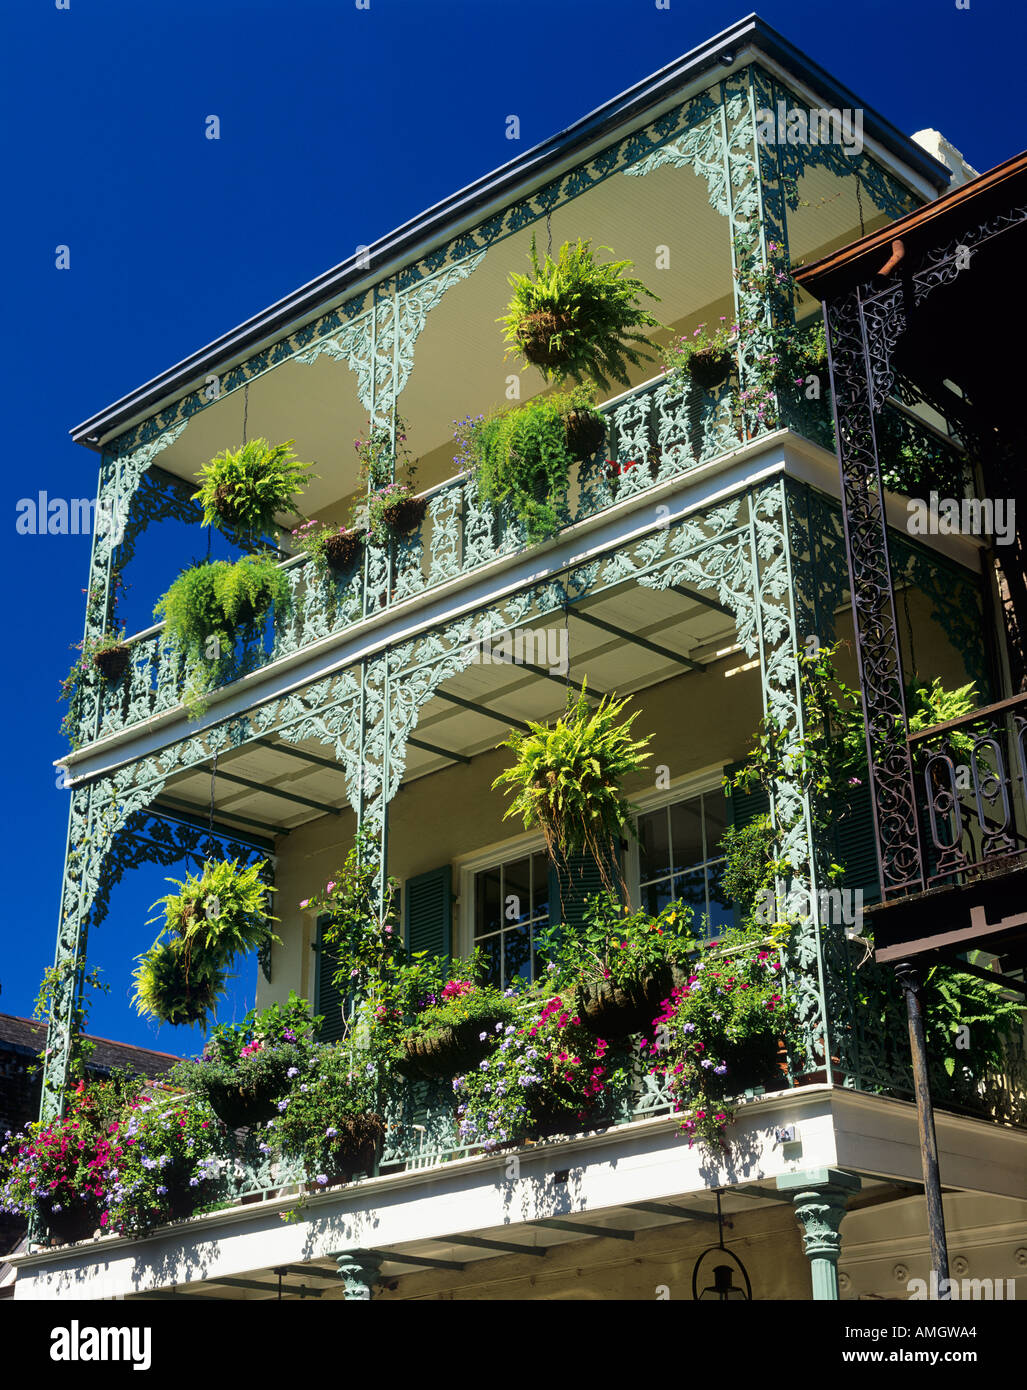 Balcony in Royal St French Quarter New Orleans USA Stock Photo